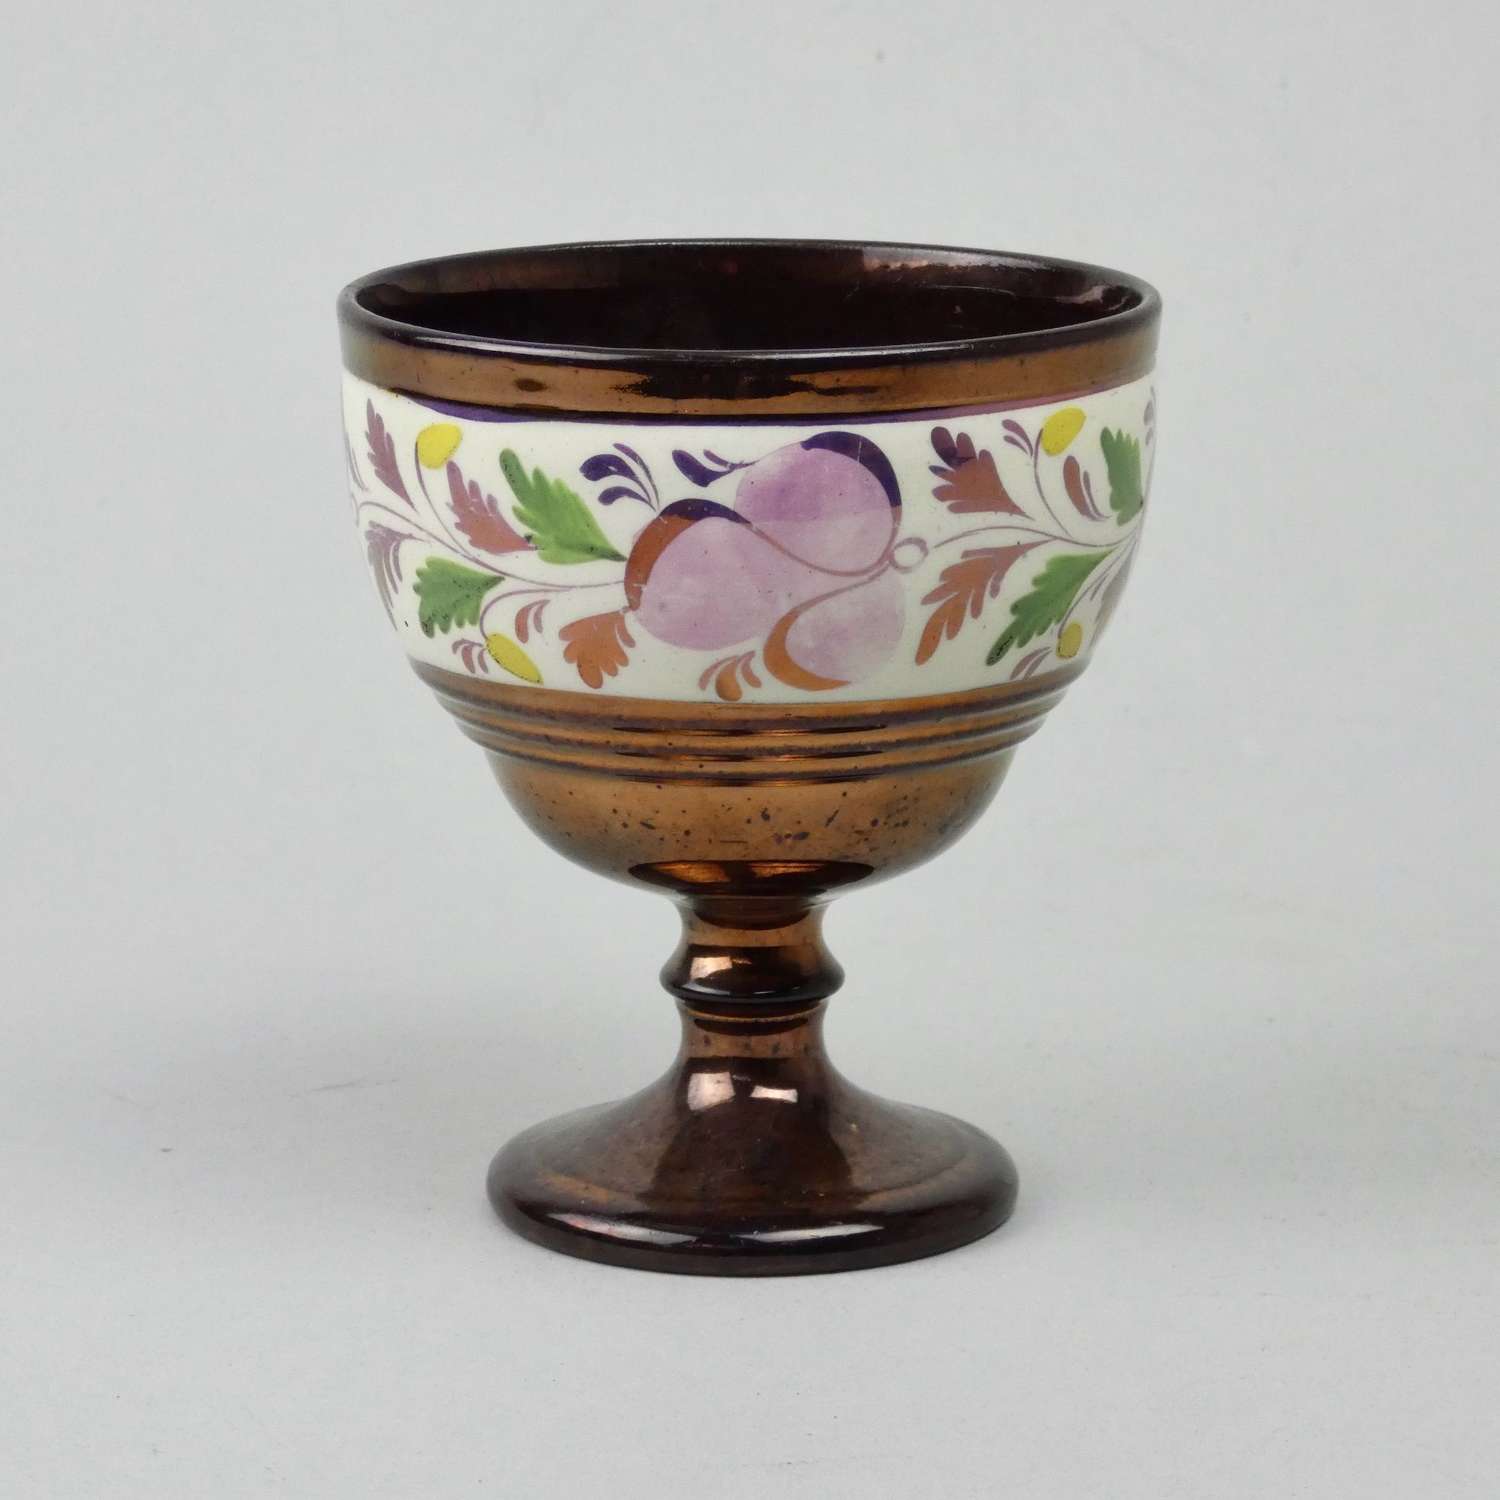 Lustre goblet decorated with flowers